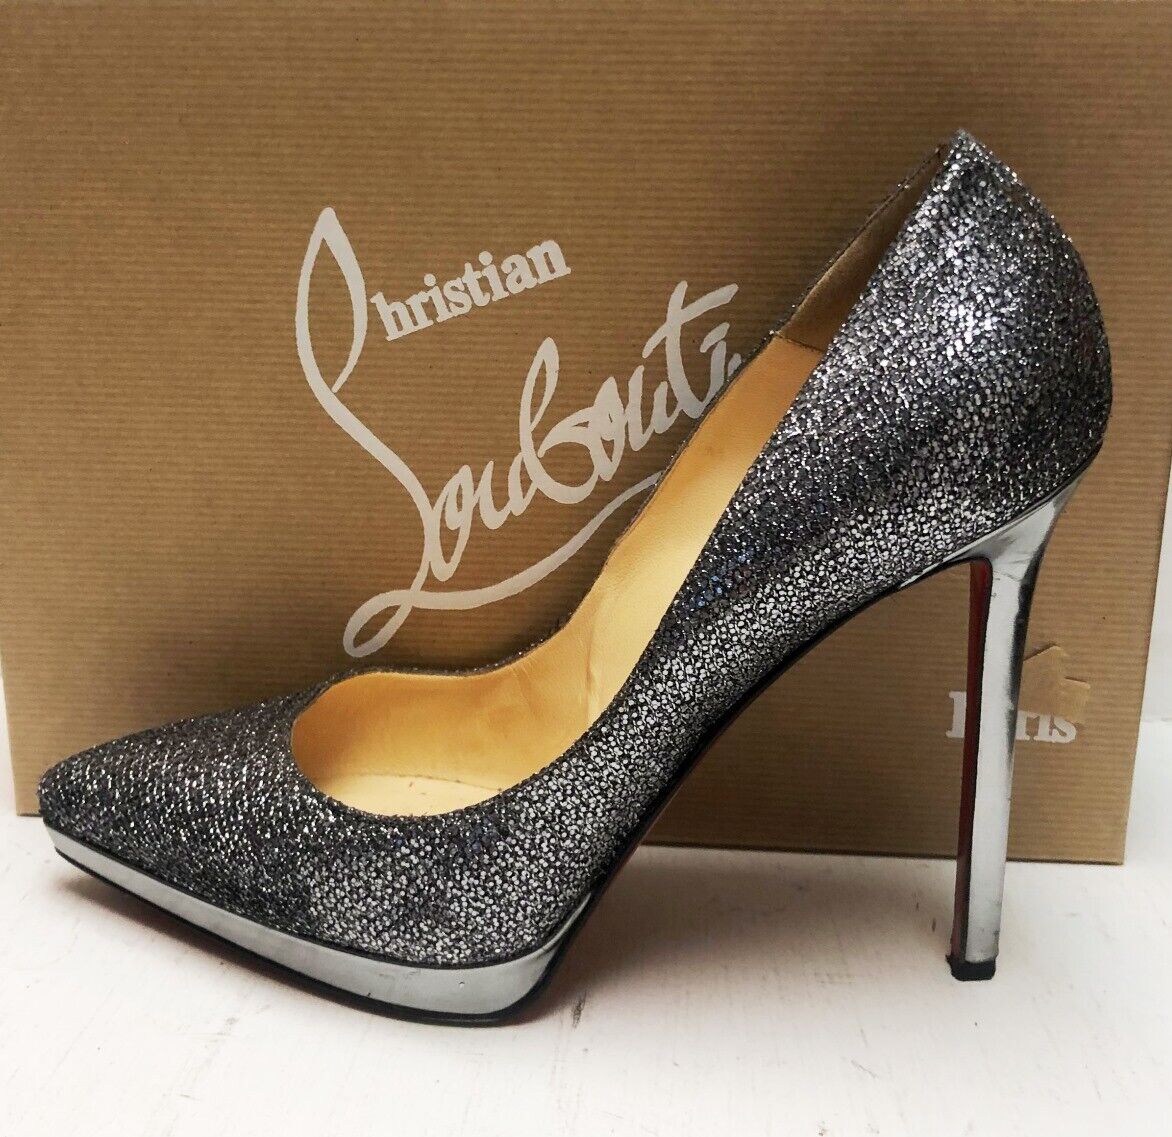 Christian Louboutin Pigalle Plato 120 Lady Glitter Heels Pumps Shoes 41 